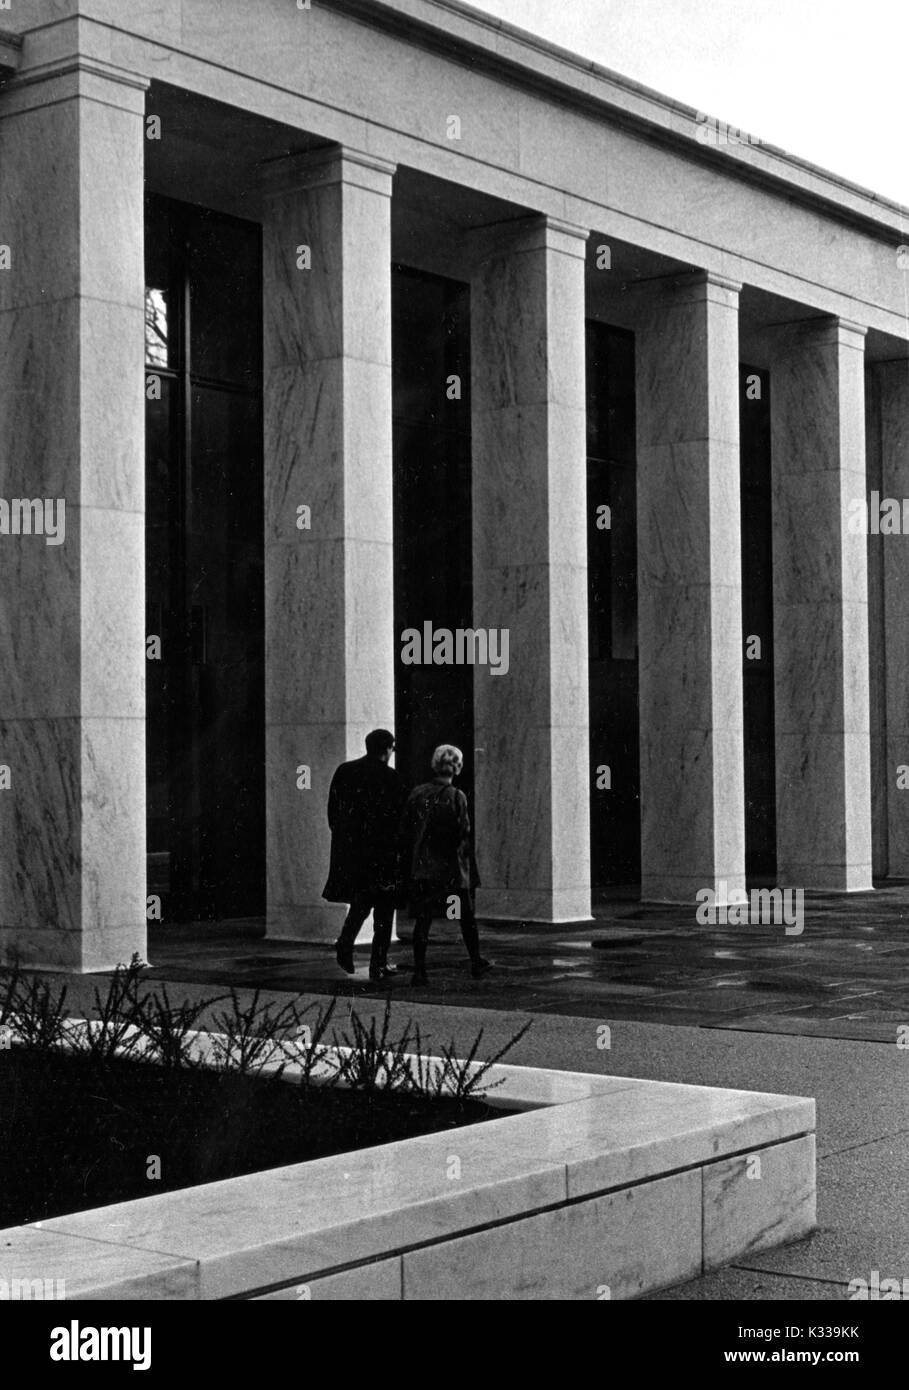 The entrance of newly opened Milton S Eisenhower Library at Johns Hopkins University from the terrace level, with a man and a woman walking side by side into the glass doors on Q Level in between the tall marble columns, with a small plot of shrubs in the foreground, on a rainy day, Baltimore, Maryland, December 12, 1964. Stock Photo